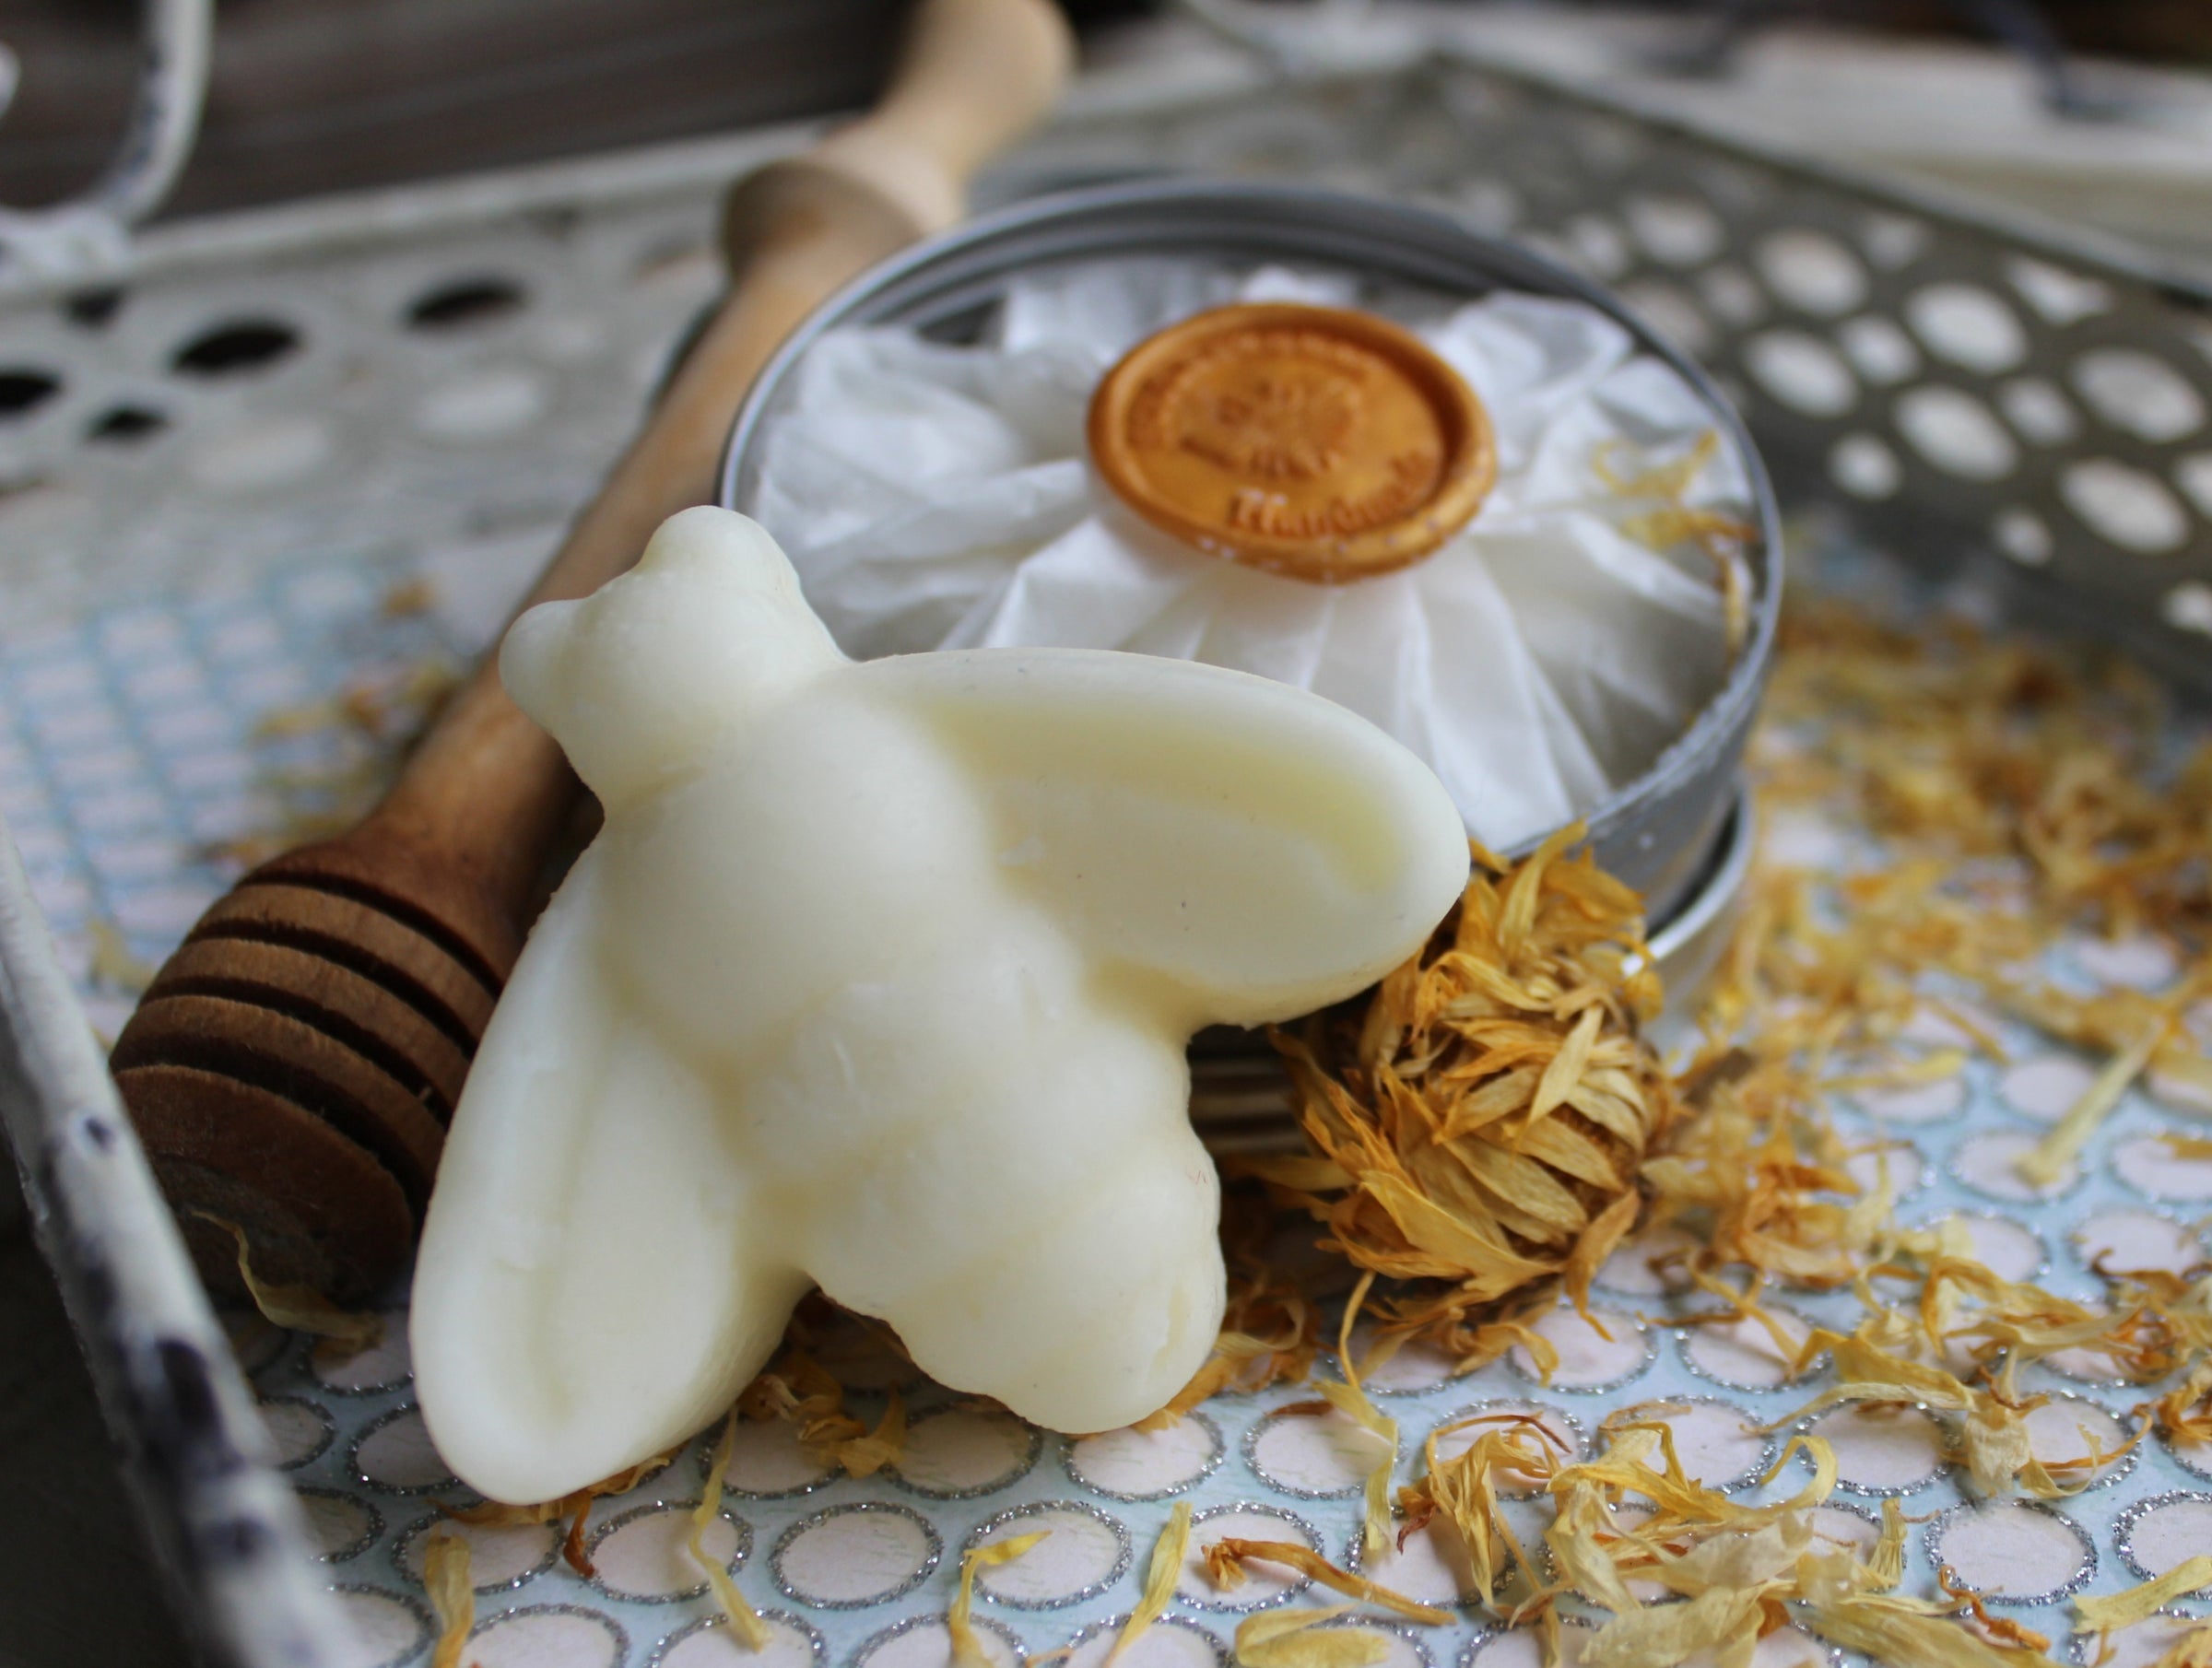 Handcrafted Premium Lotion Bars – The Magical Bee